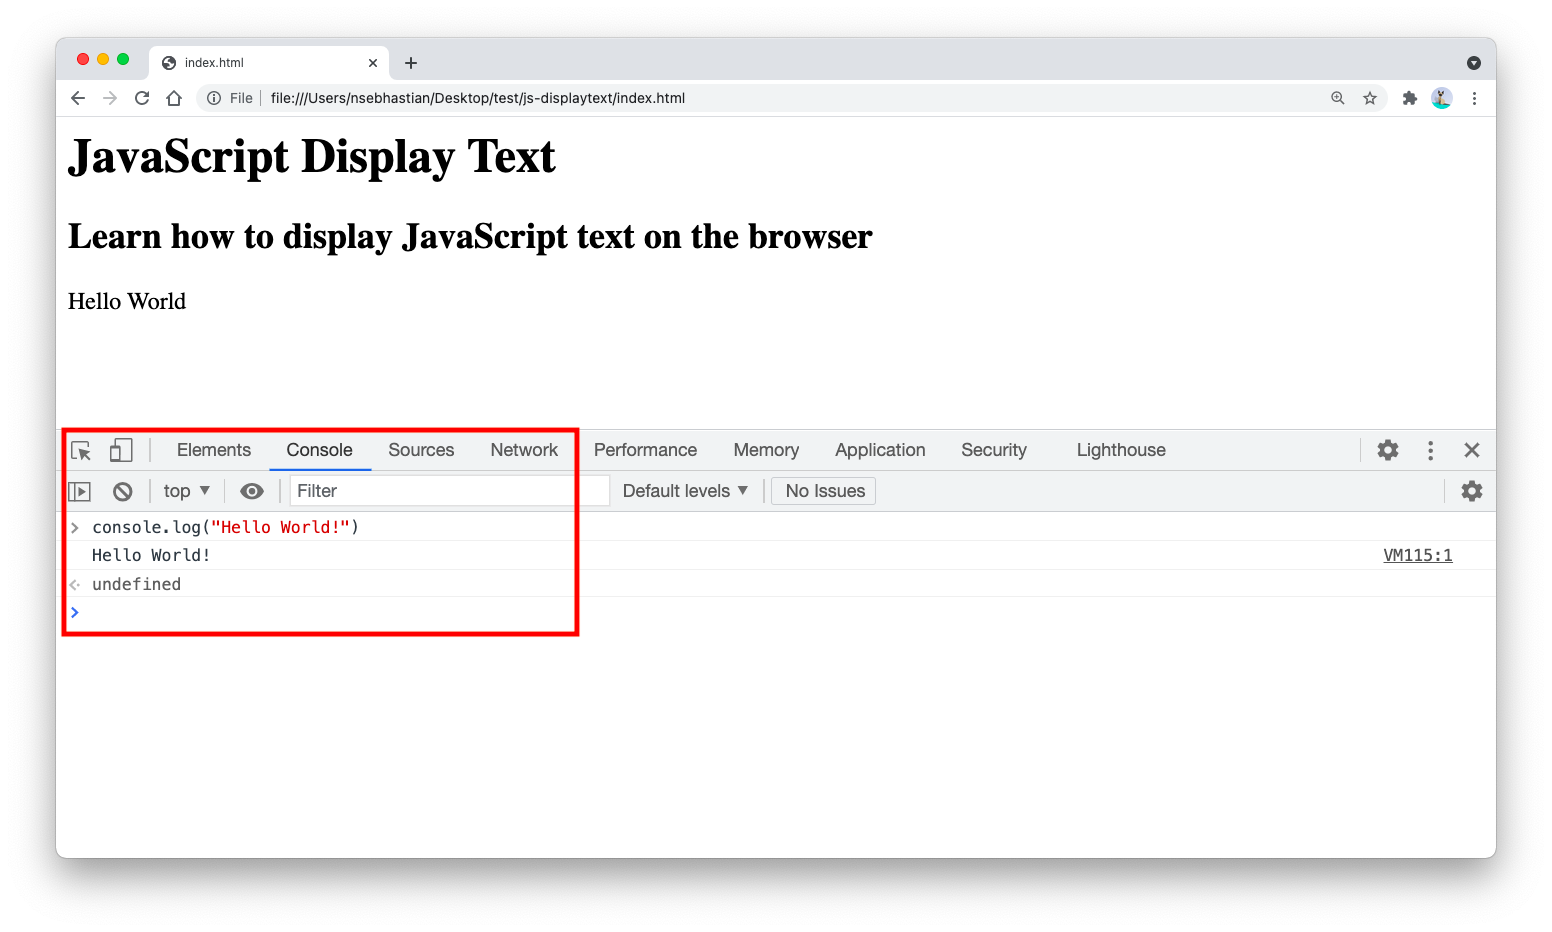 How to display text in the browser using JavaScript